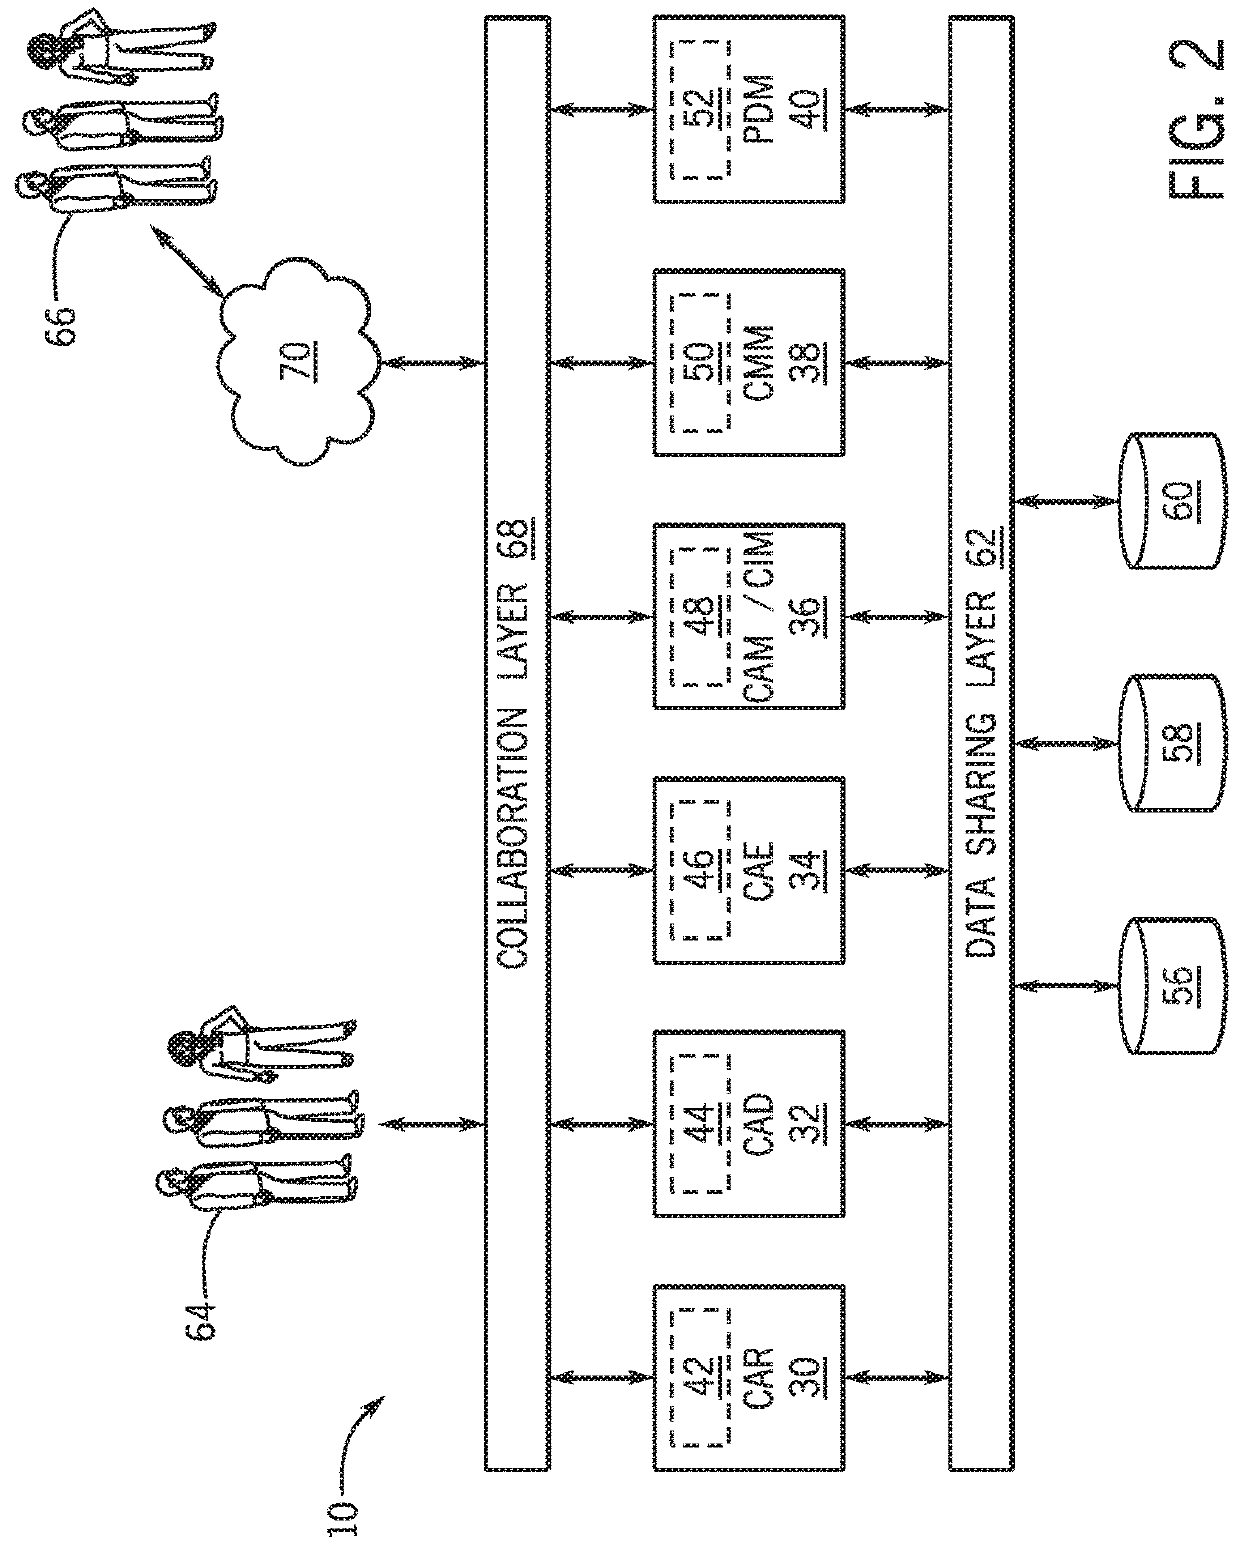 Systems and methods for generating association types to portions of a model